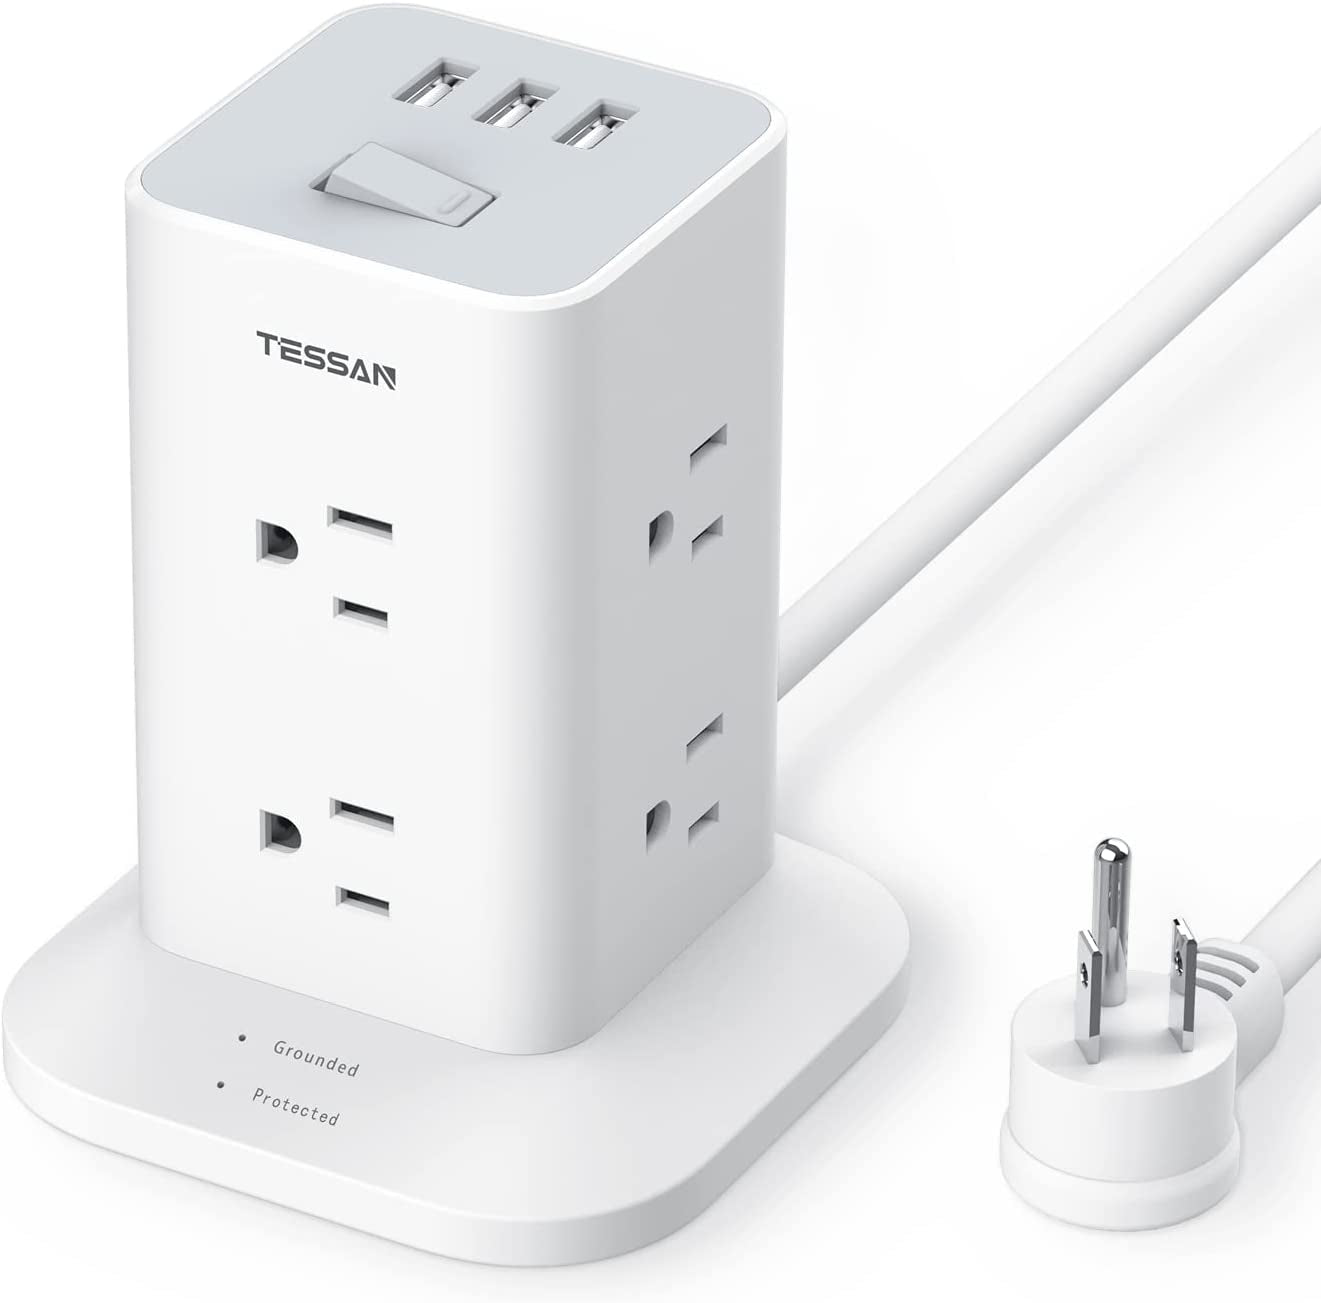 Multi-Outlet Power Strip Tower with Surge Protection, USB Ports, and Extension Cord - Ideal for Office, Dorm, or Home Uses